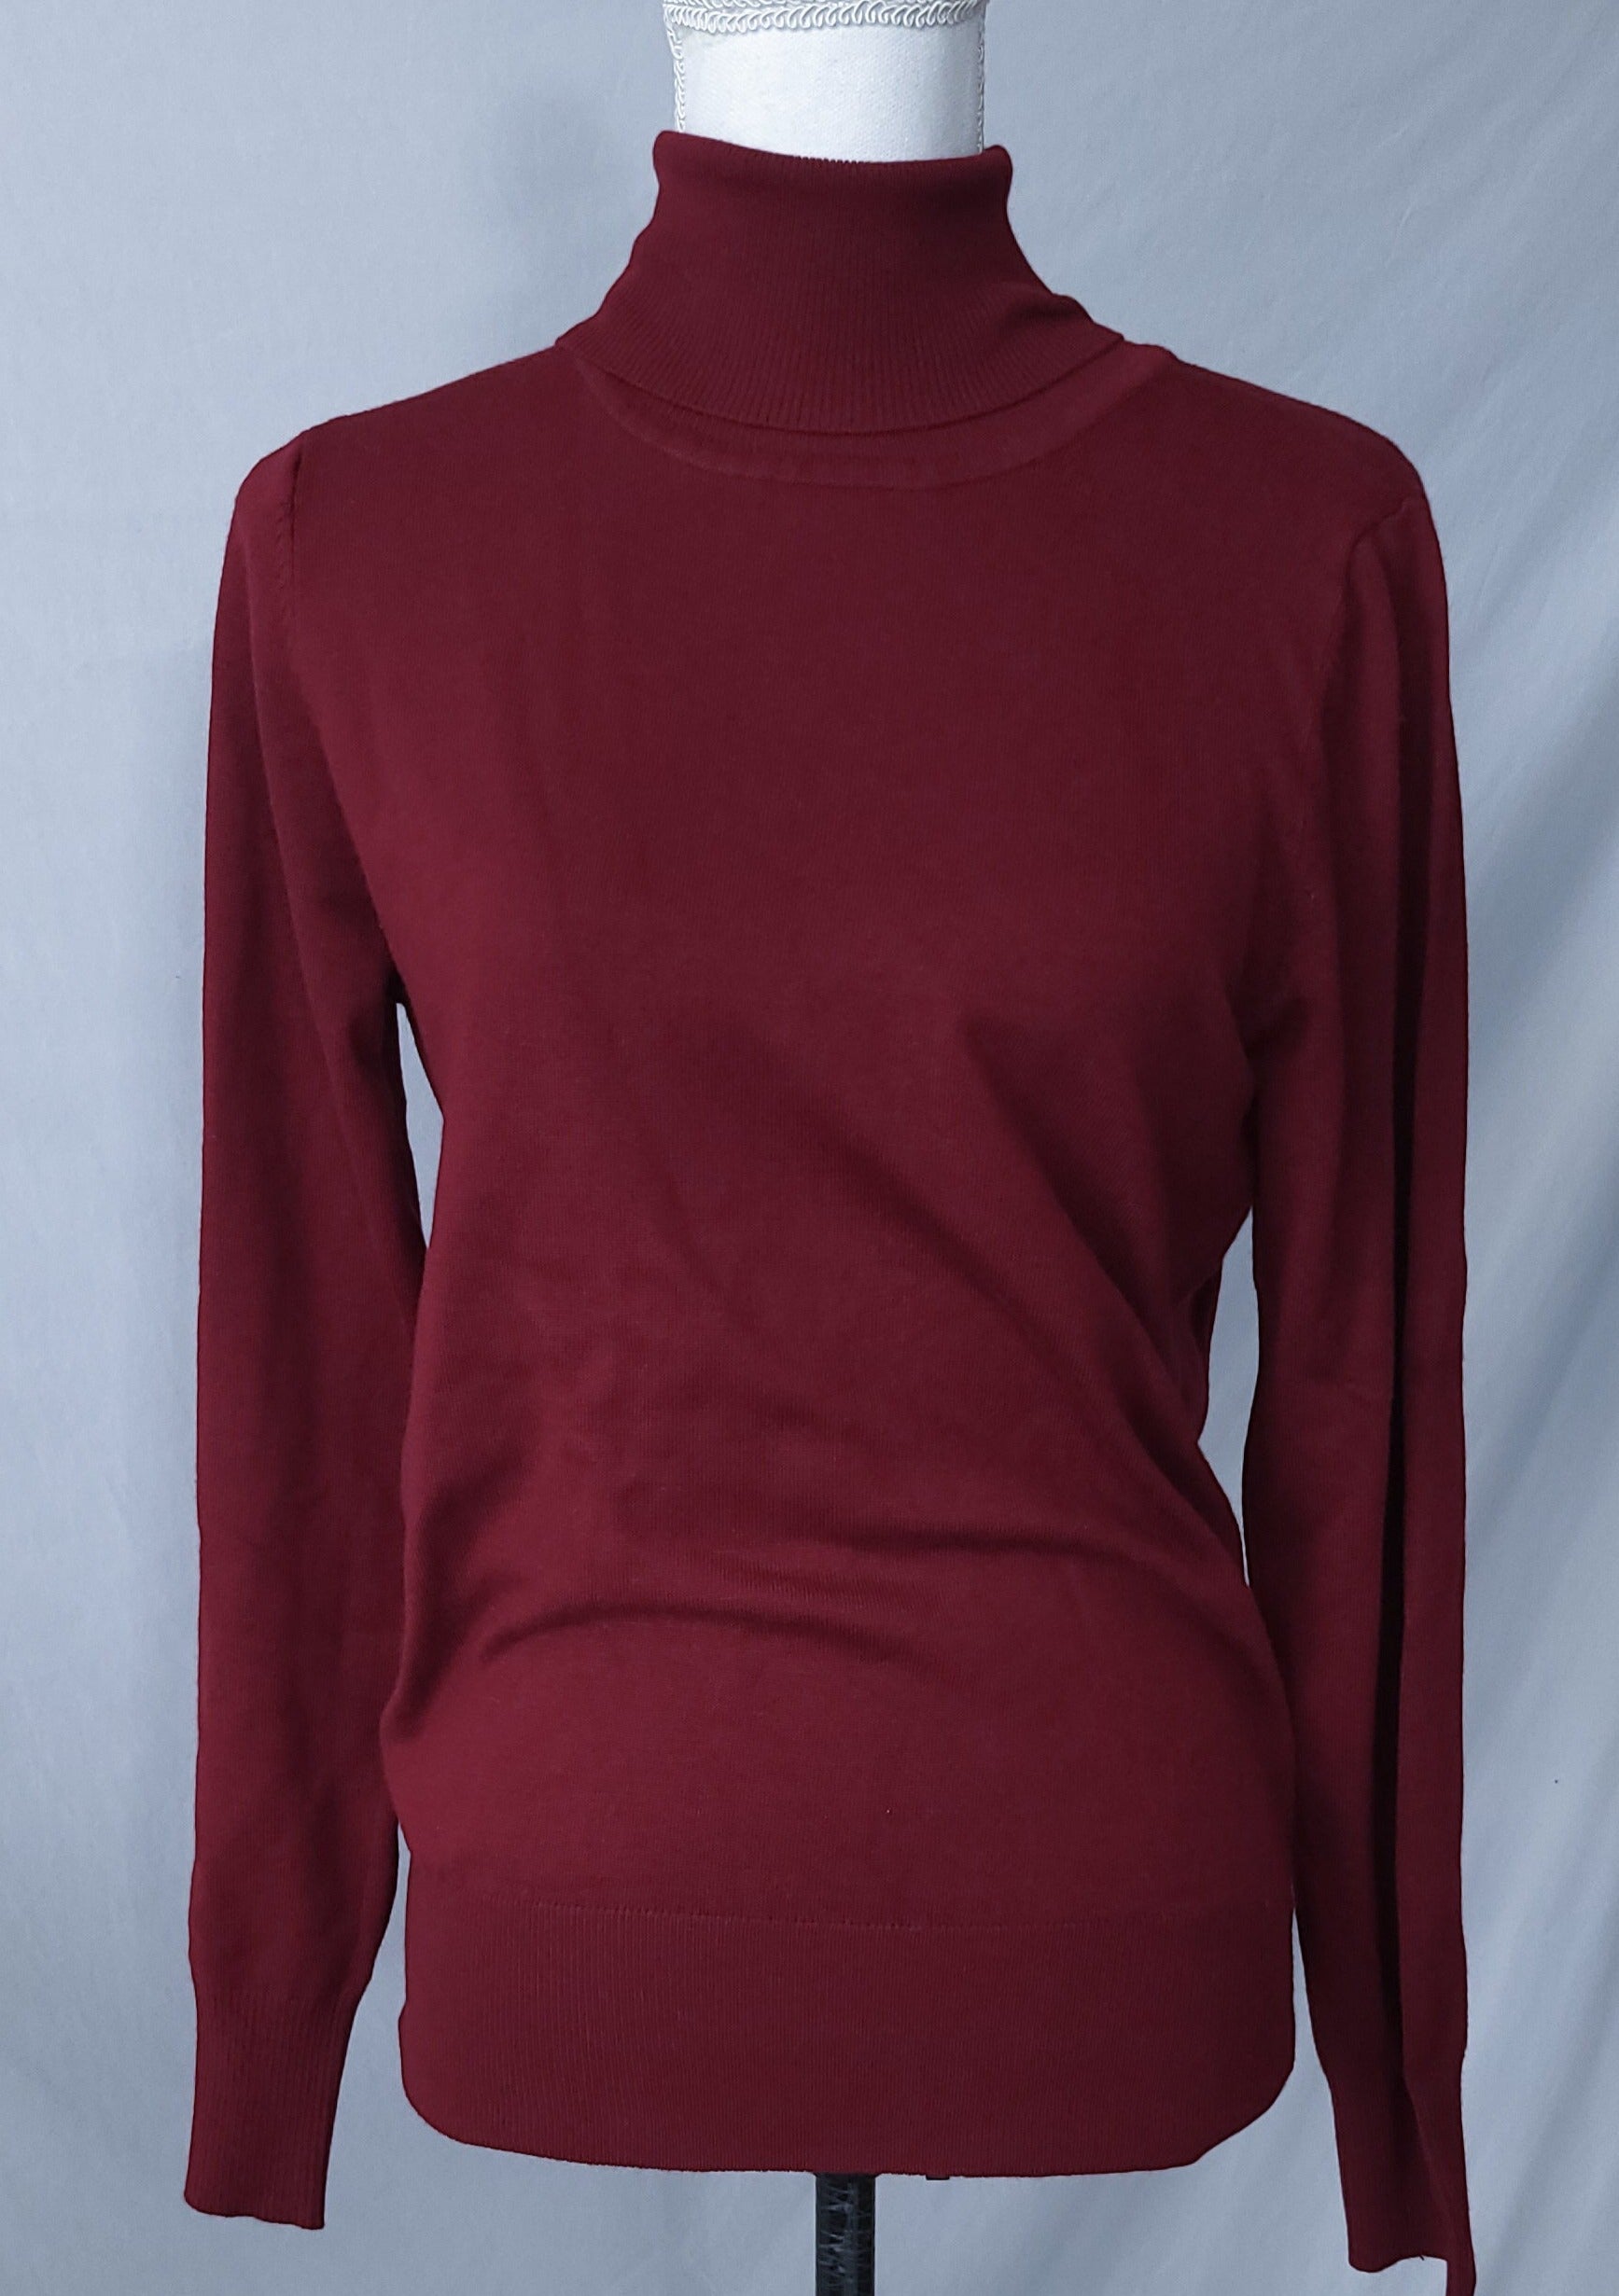 Fitted Burgundy Turtle Neck Sweater